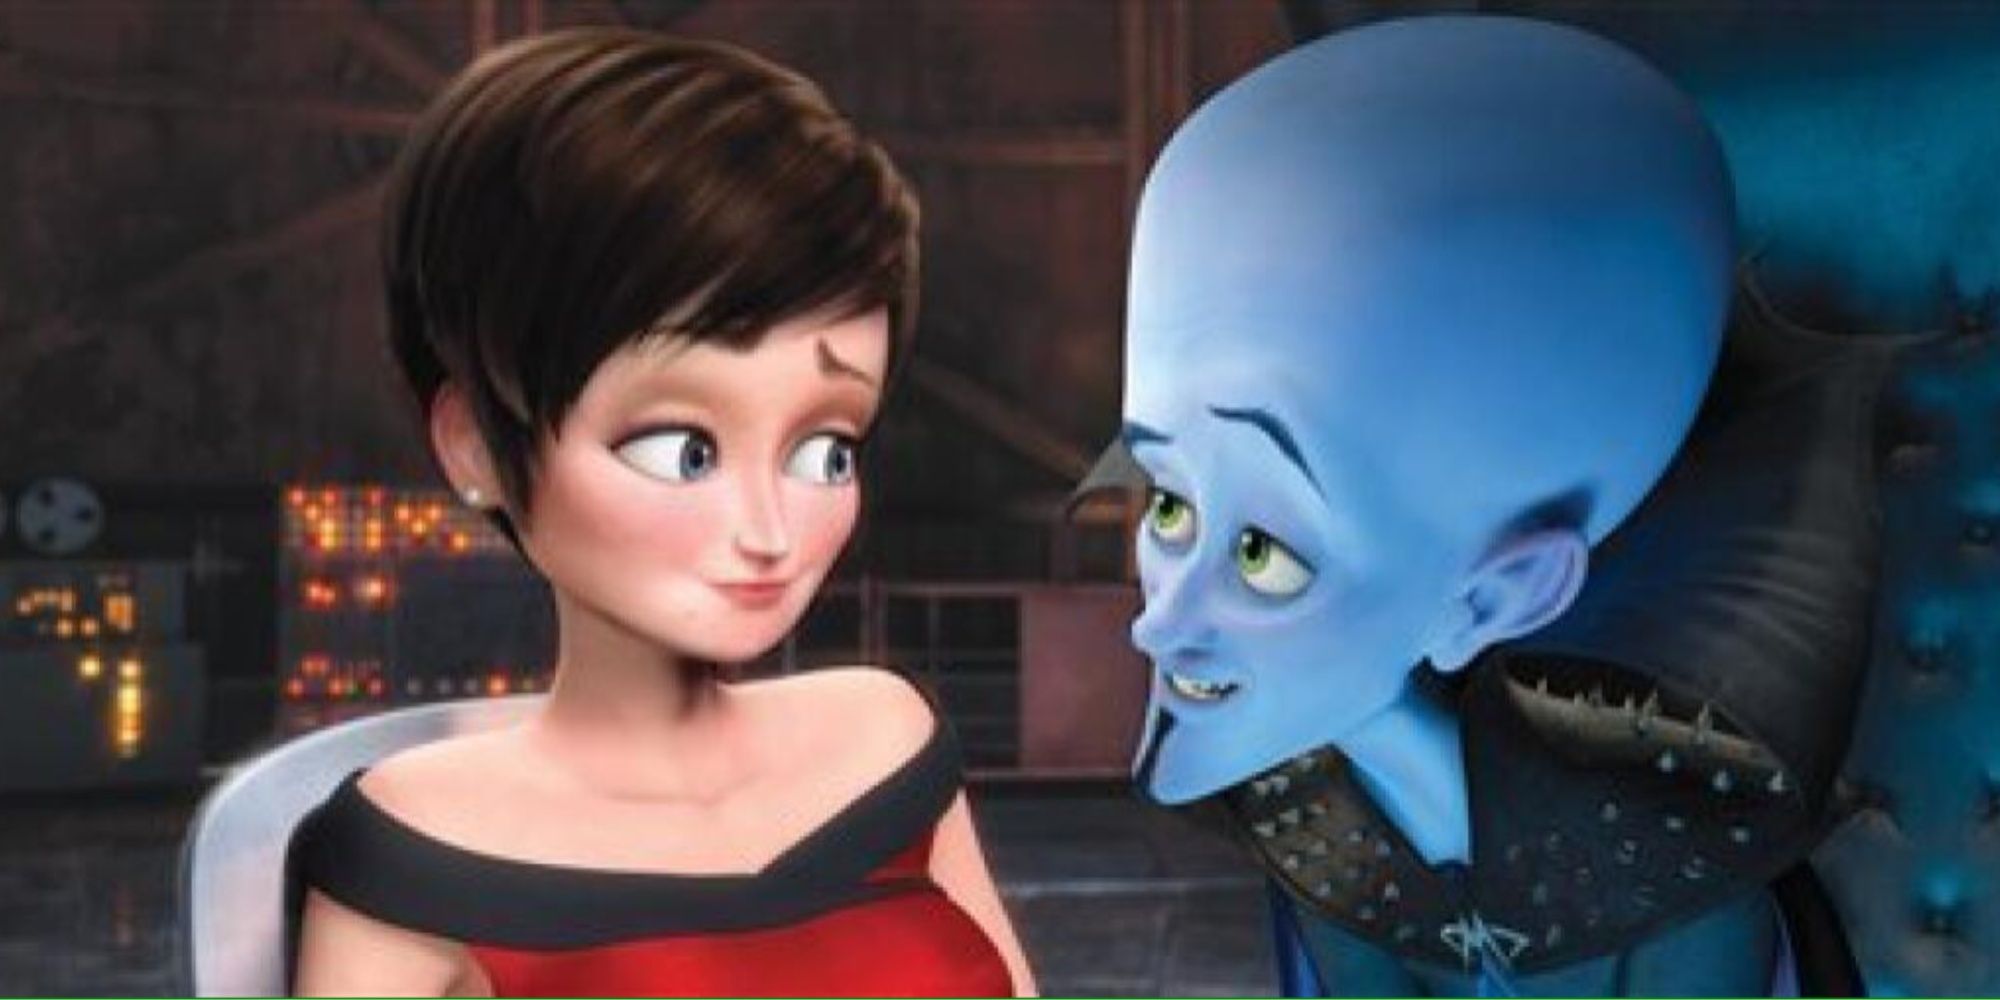 Megamind and Roxanne from the movie Megamind